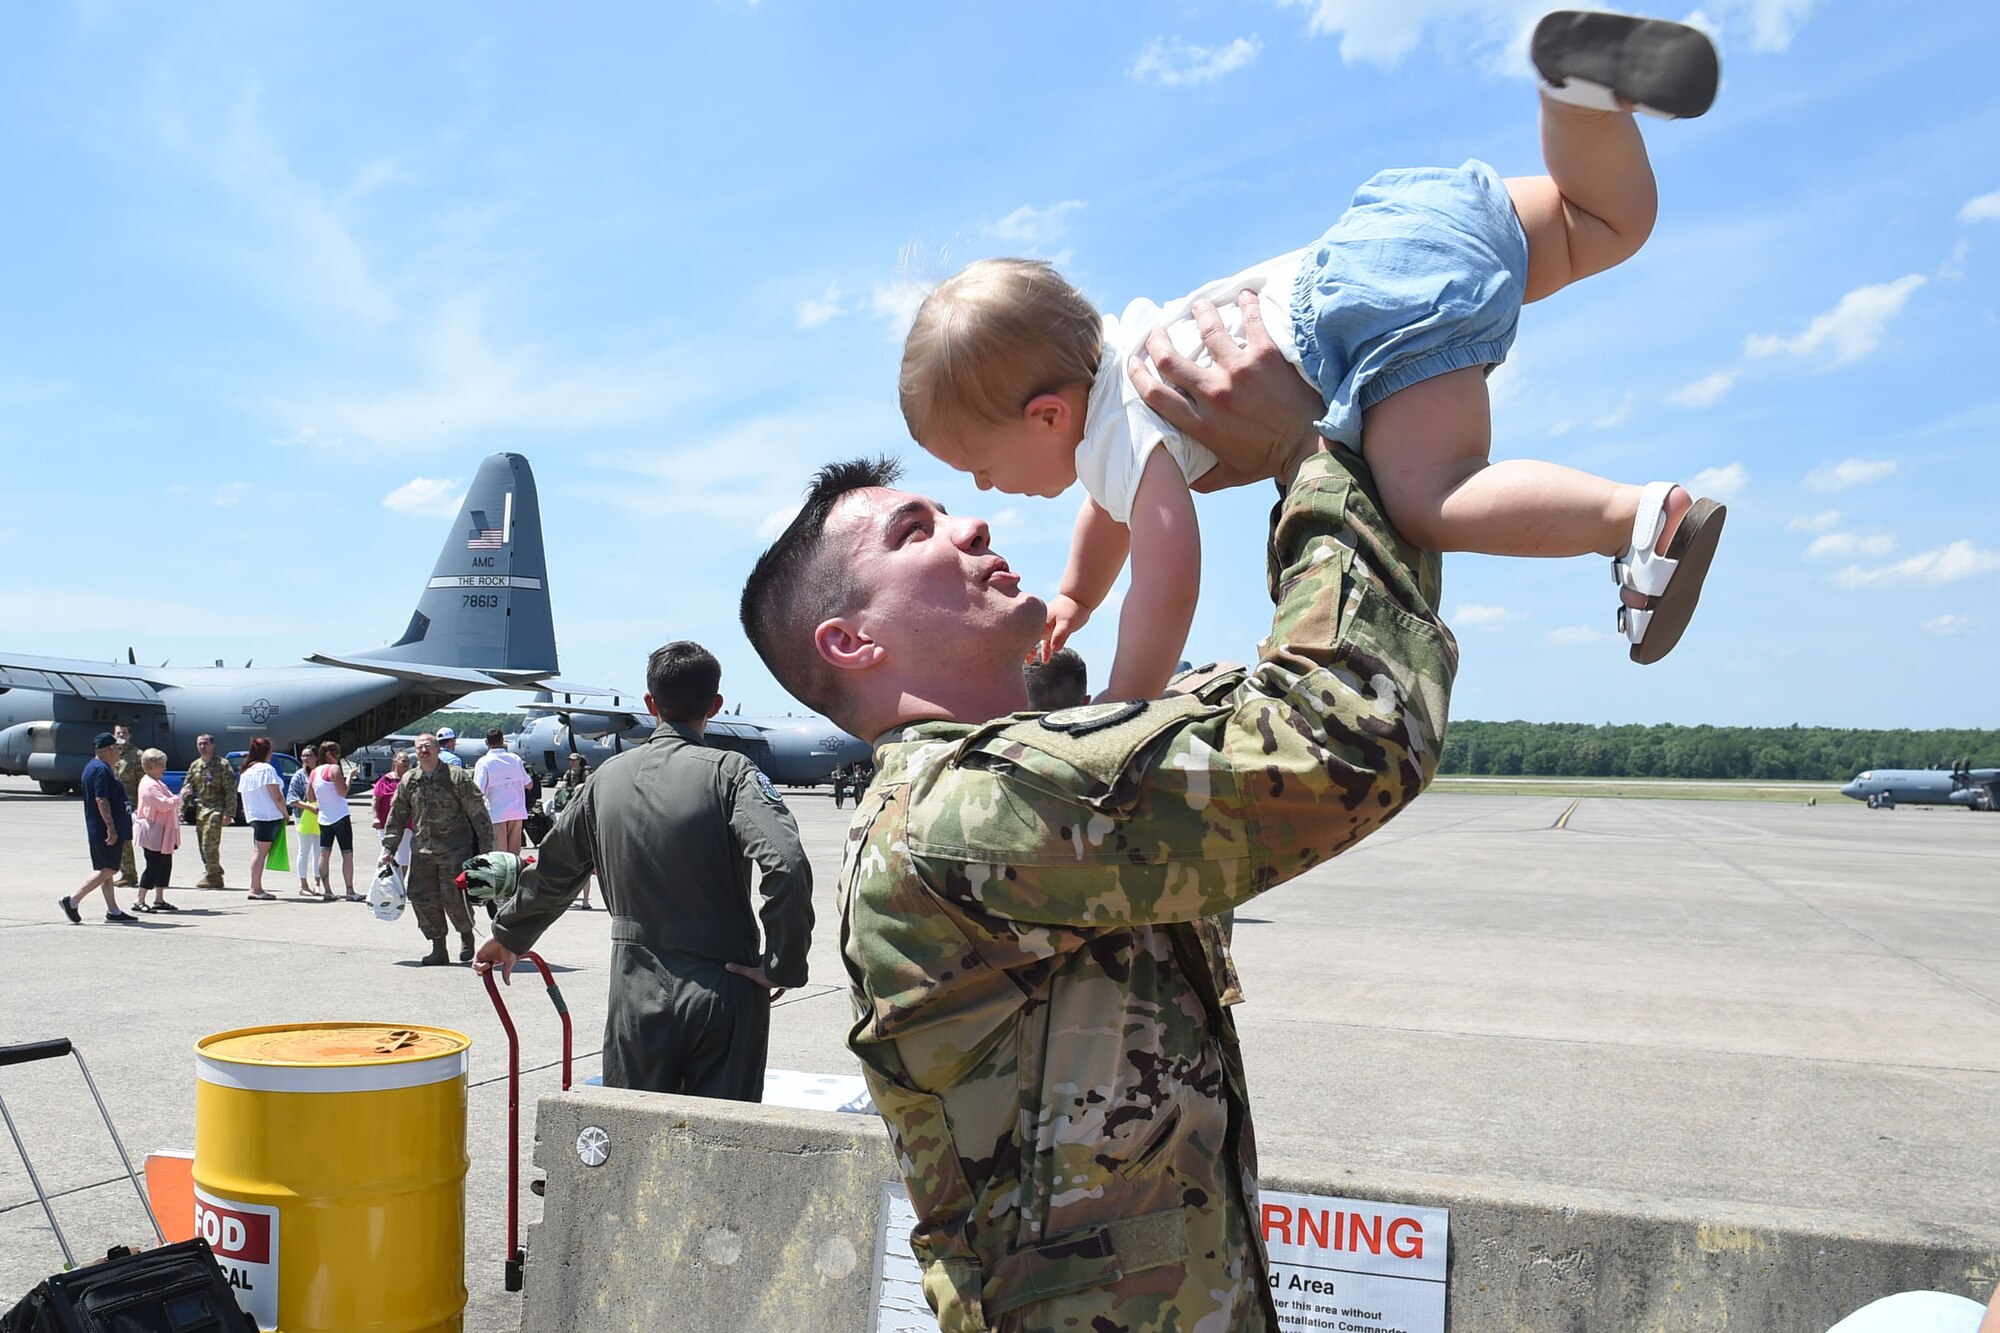 An Airman holds his small child in the air